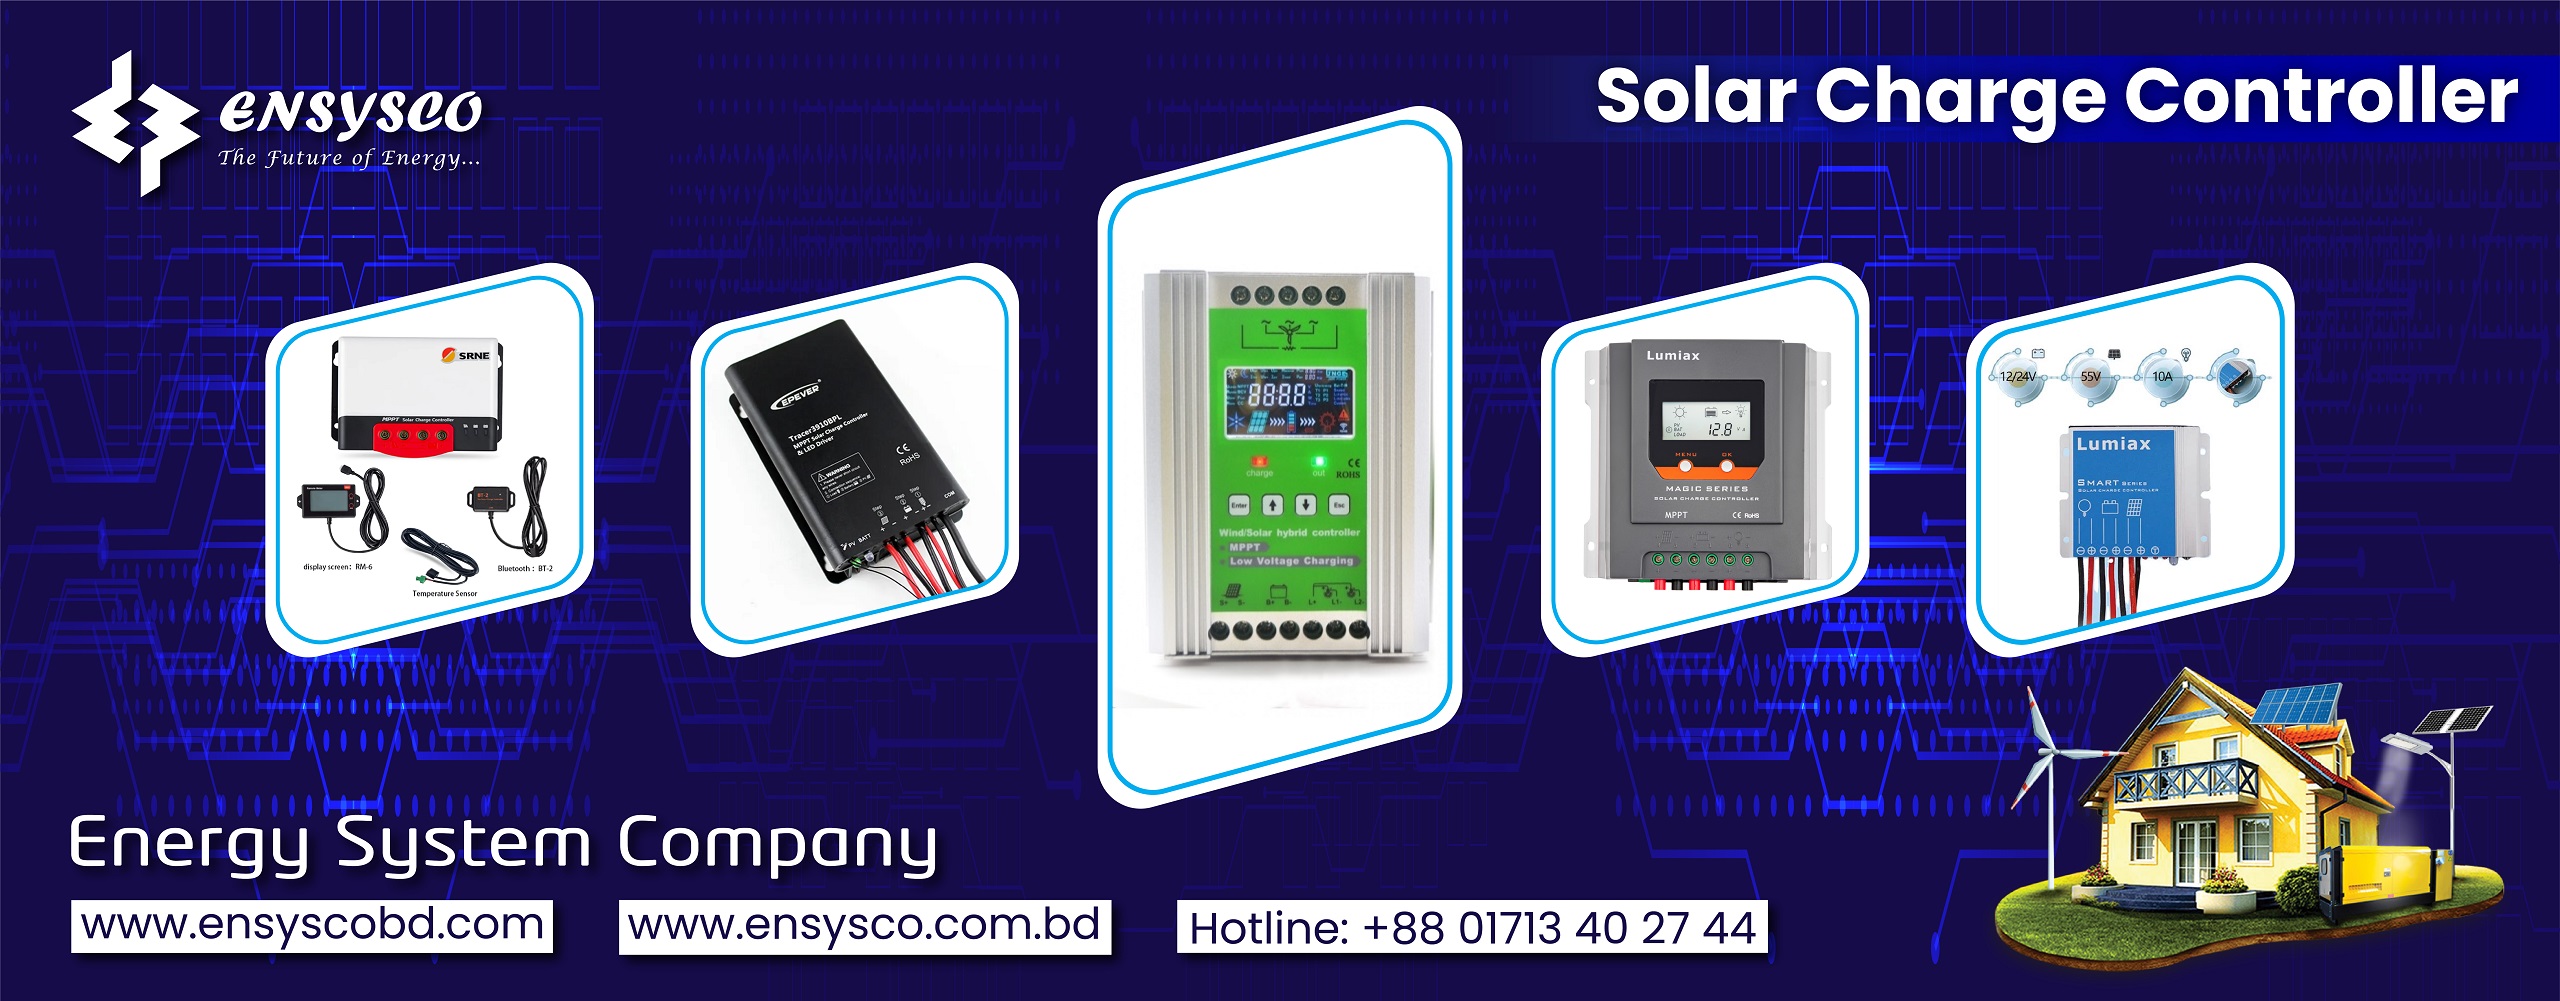 Solar Charge Controller Price in Bangladesh